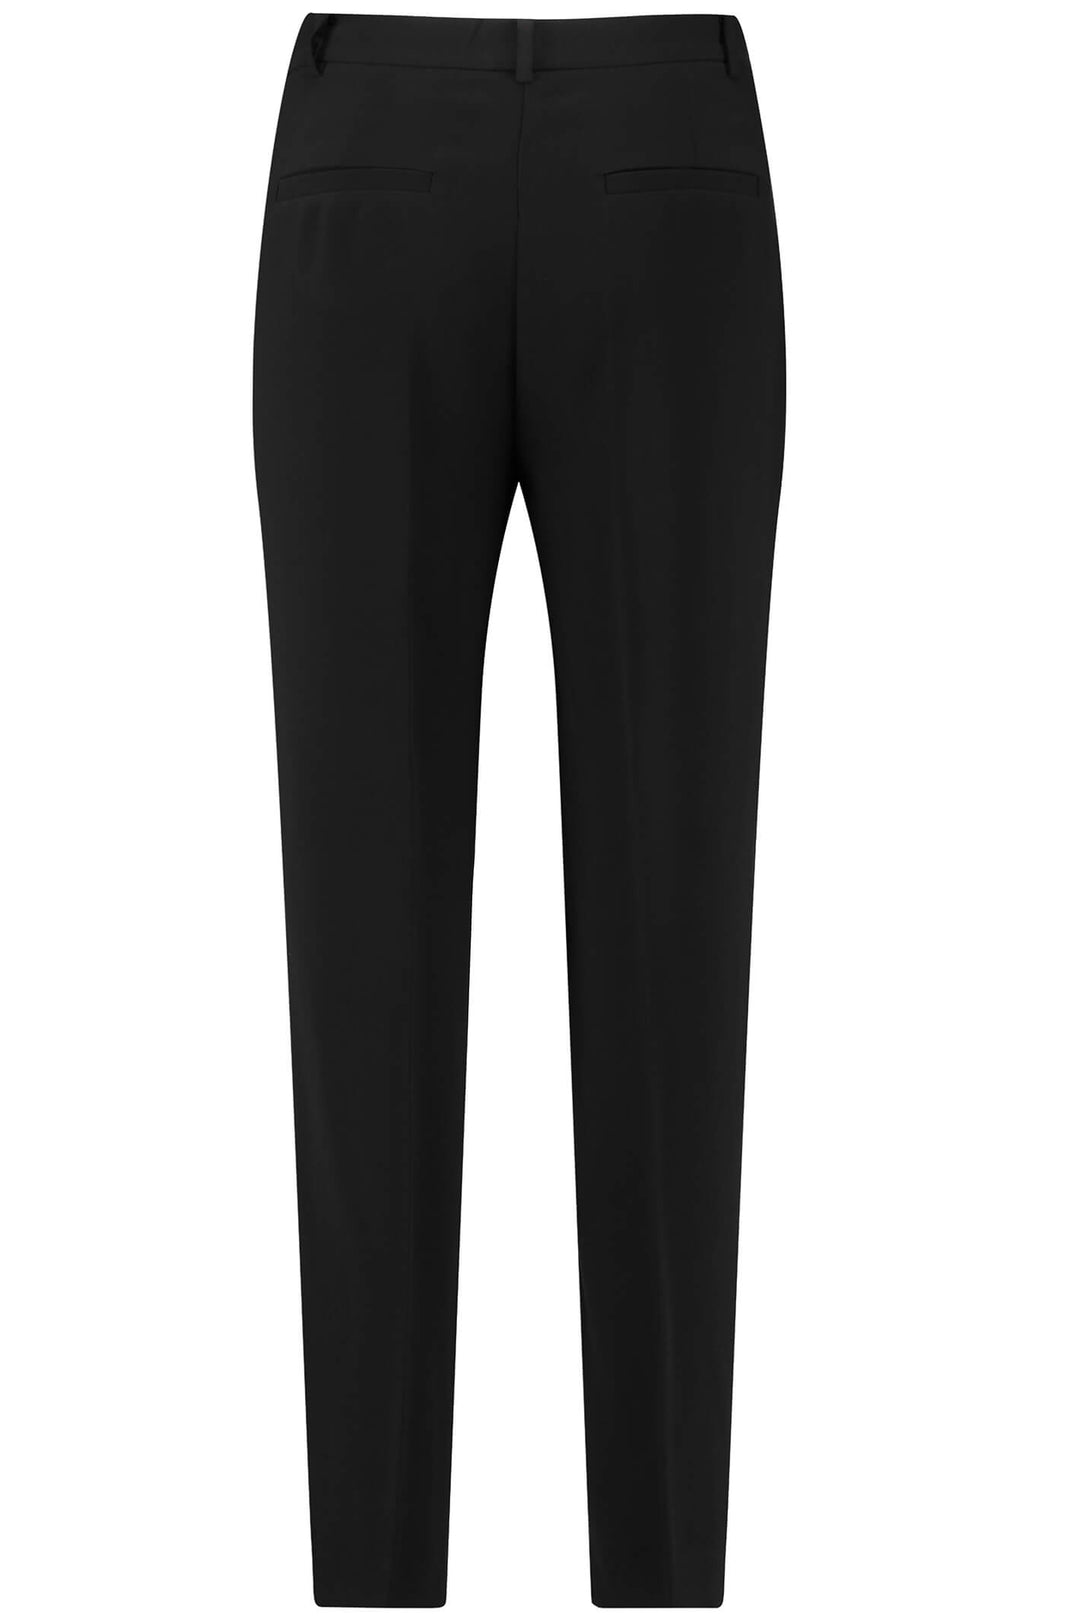 Gerry Weber 925010 Black Trousers - Experience Boutique